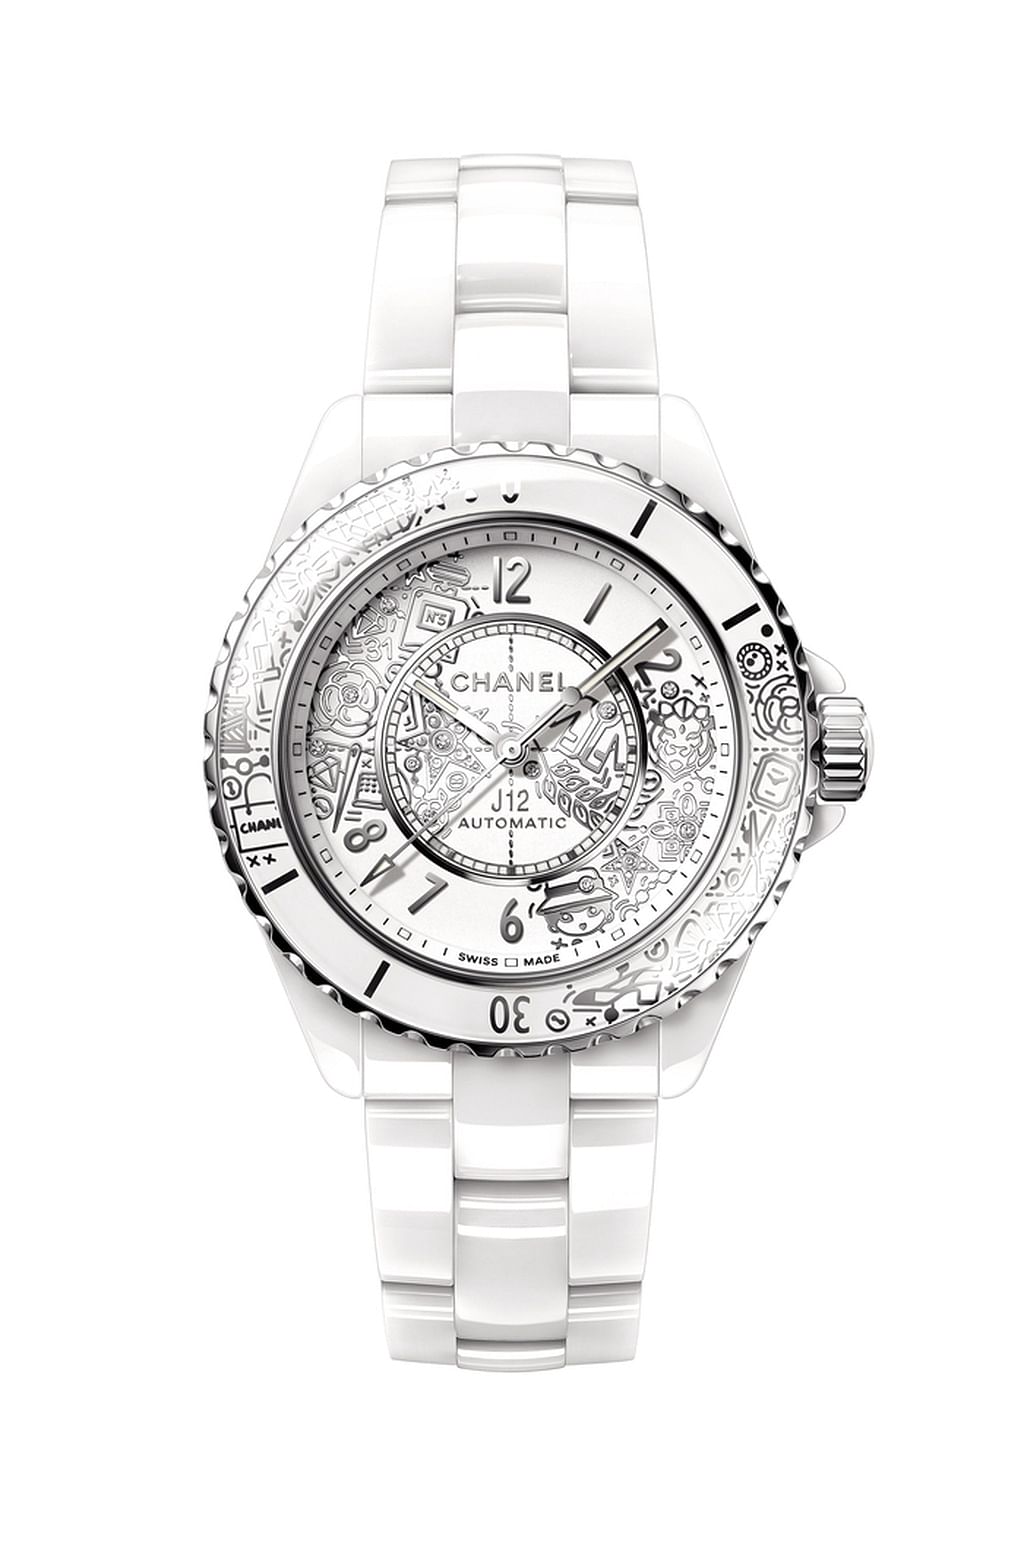 Chanel celebrates the 20th anniversary of its J12 watch with